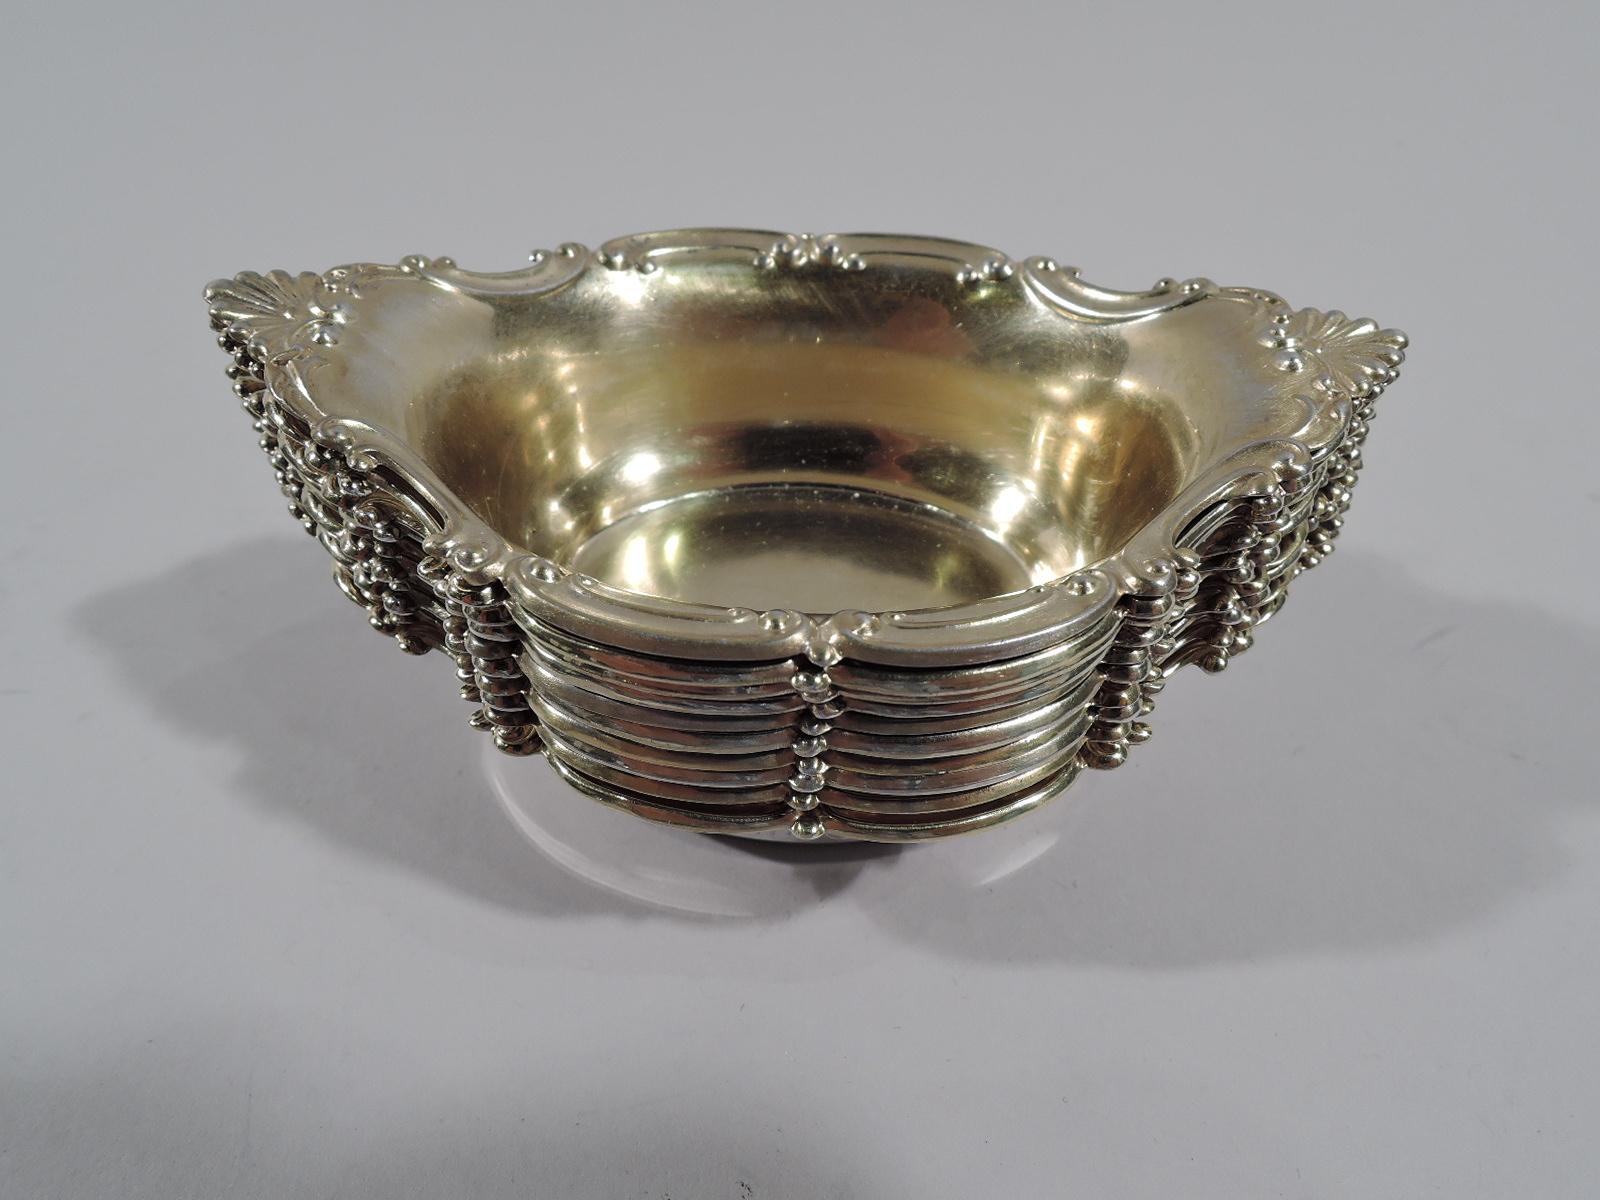 Set of 10 turn-of-the-century Edwardian sterling silver nut dishes. Made by Gorham in Providence. Each: Oval bowl with c-scroll rim and scallop shell ends. Interior gilt-washed. Fully marked and numbered A2433. Total weight: 8 troy ounces.